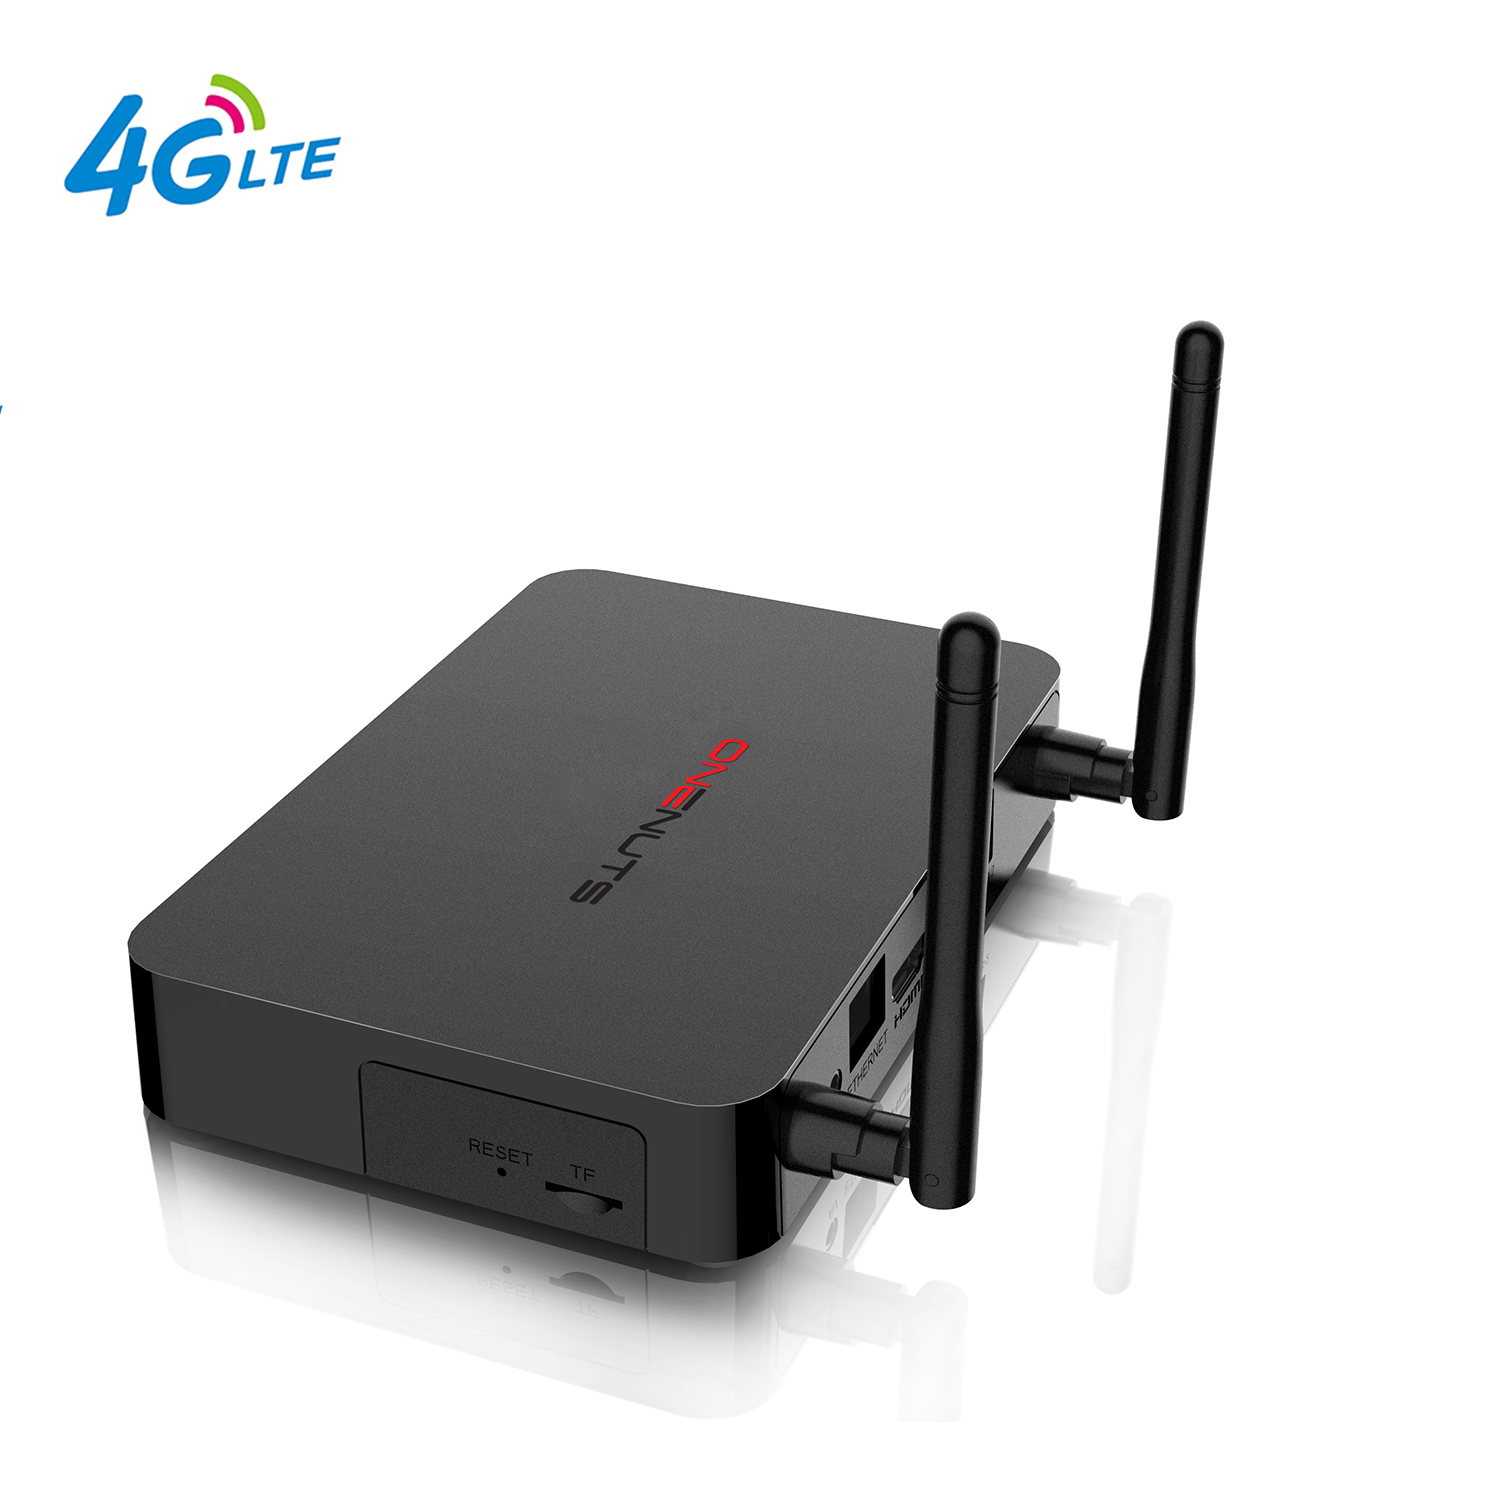 Android TV Box Huawei WCDMA مودم مدمج، Android TV Box WCDMA 4G/3G Dongle